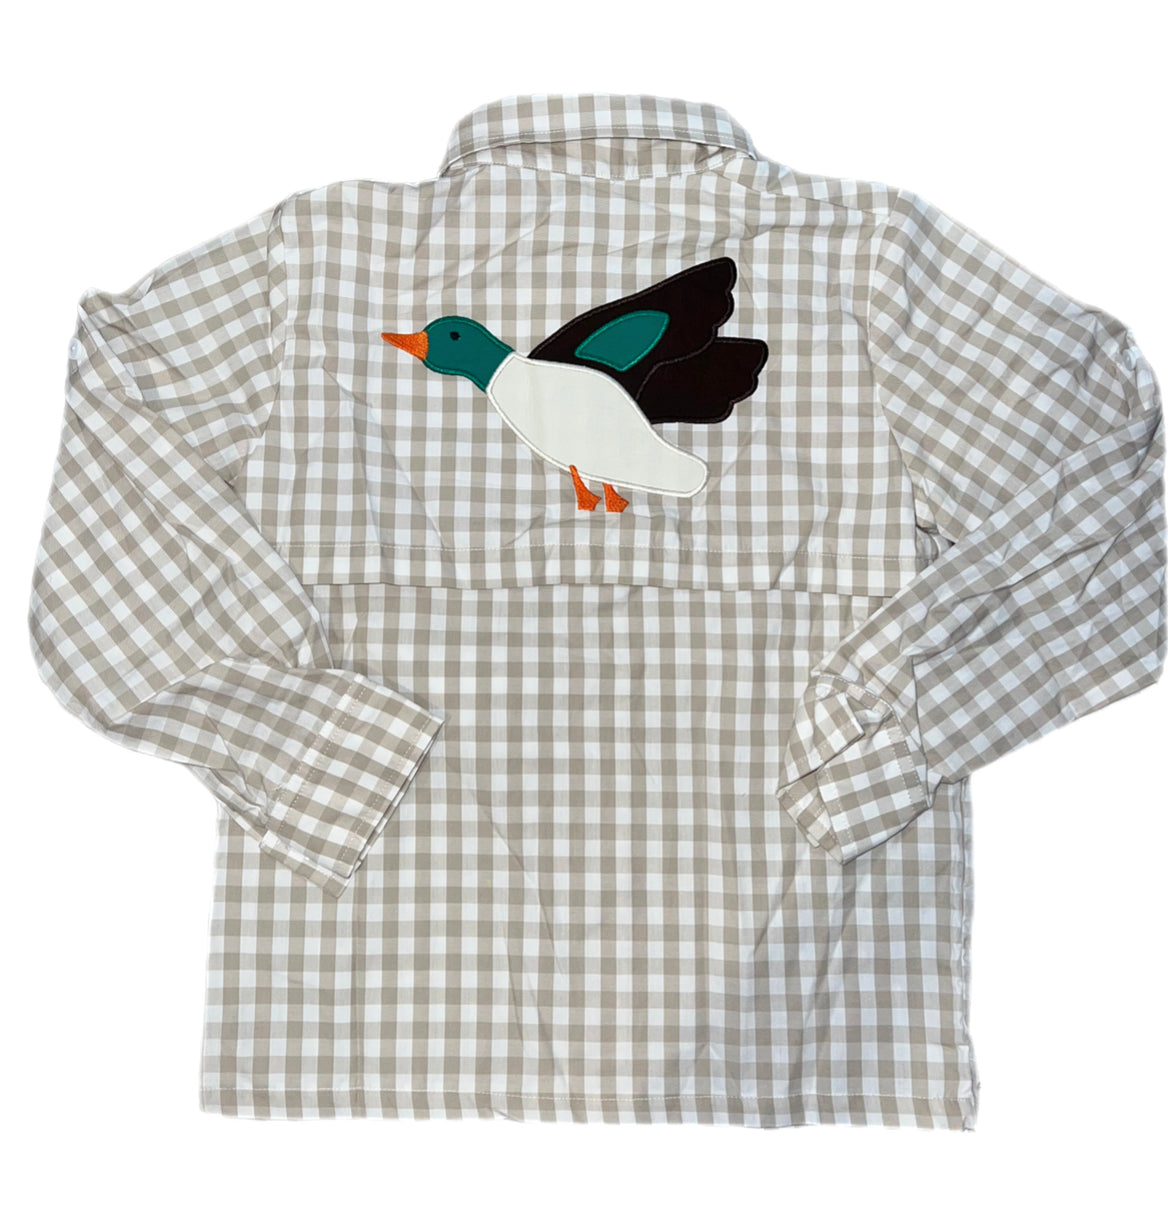 RTS: SBSC- Boys Only Collection- Duck Applique- Boys Woven Shirt “PTS”